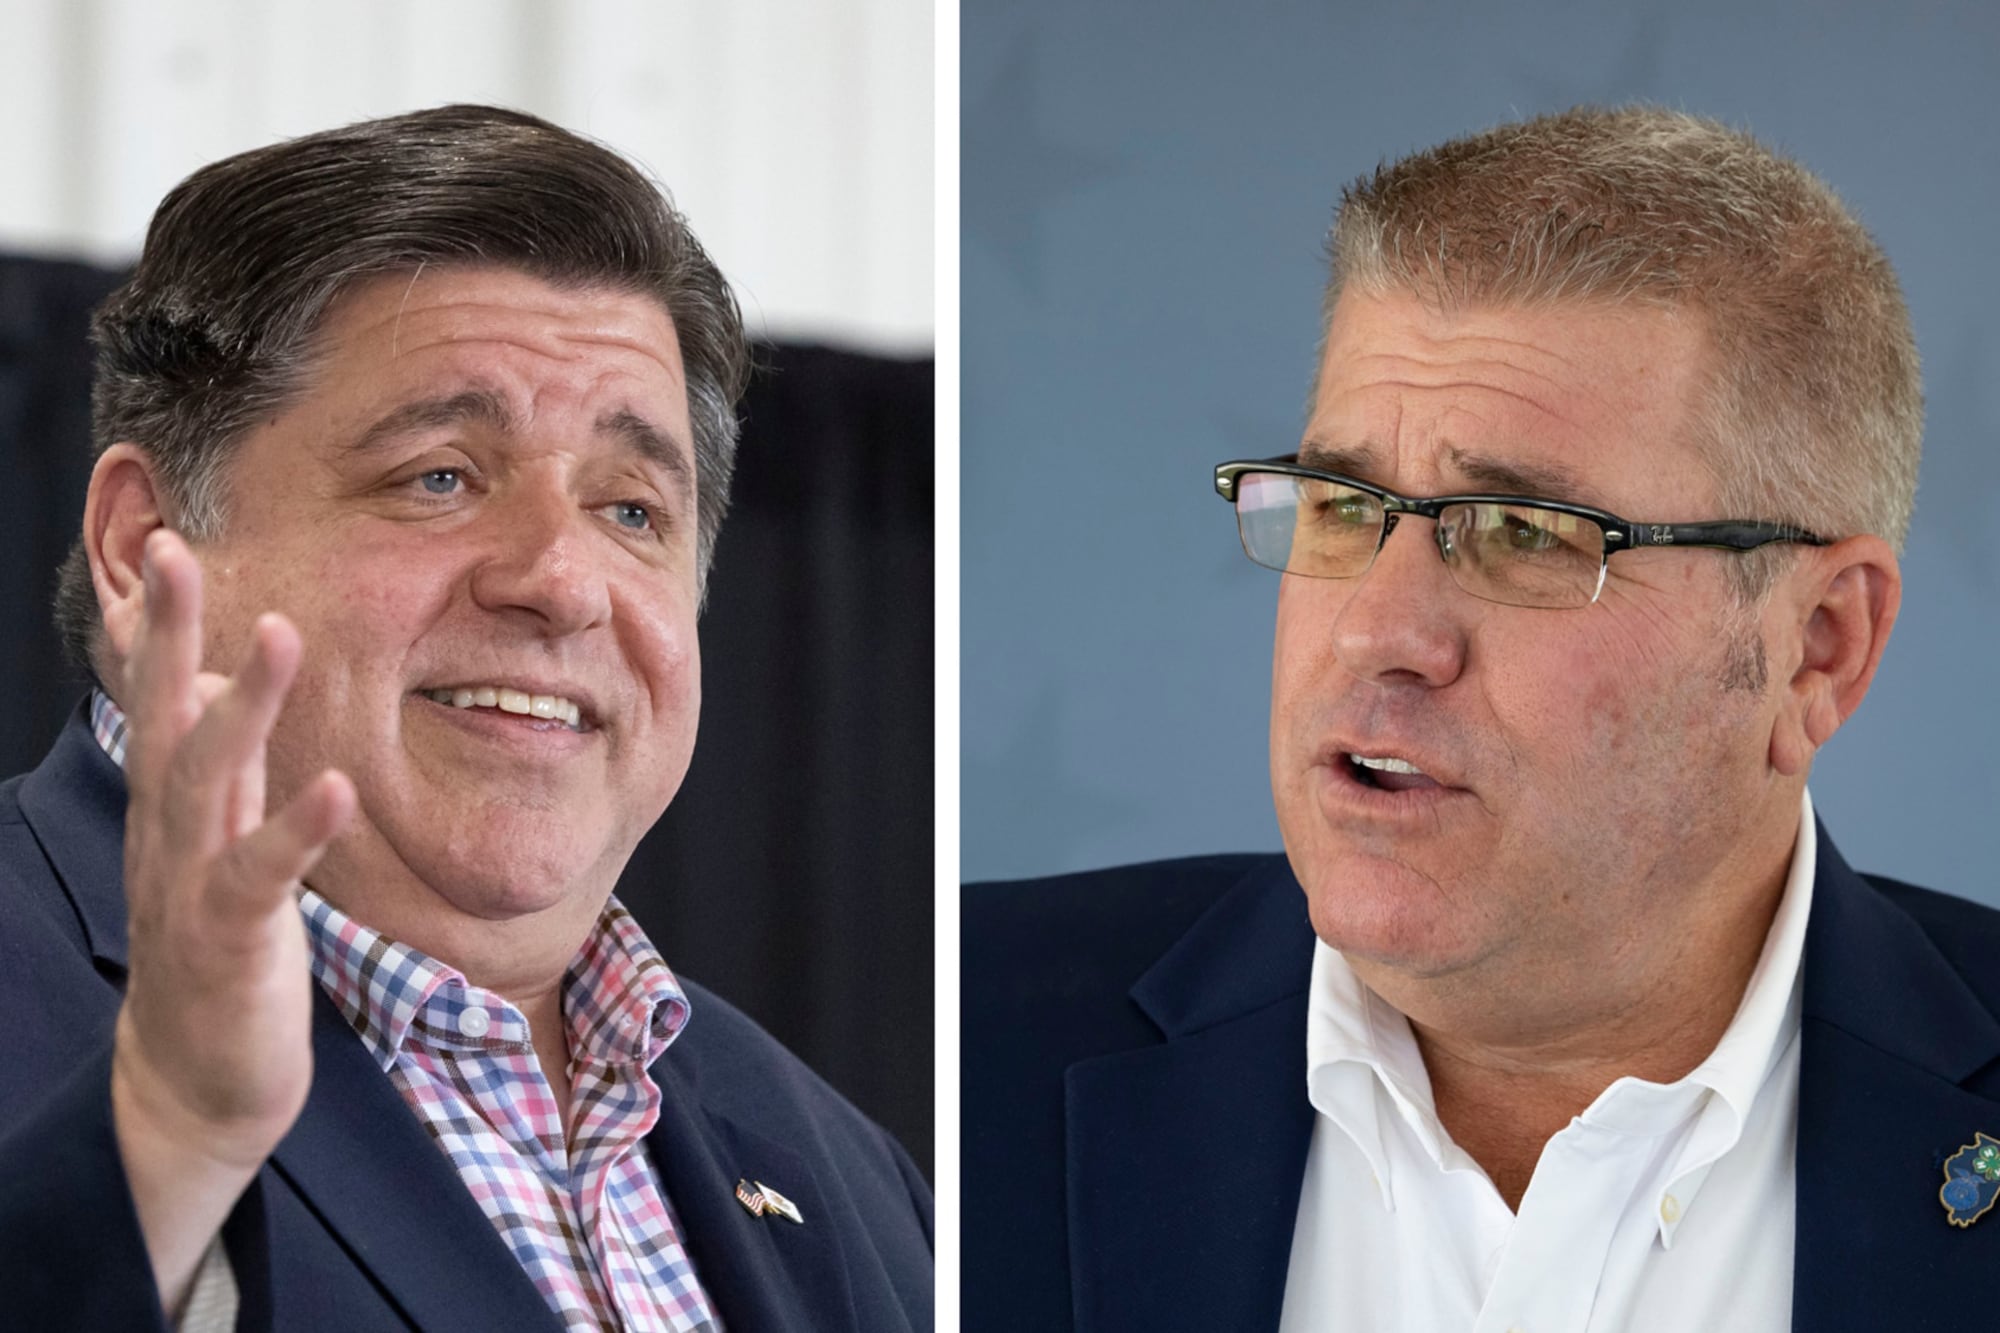 Democratic Illinois Gov. J.B. Pritzker (left) won a second term, as preliminary election results show he defeated Republican challenger state Sen. Darren Bailey (right).